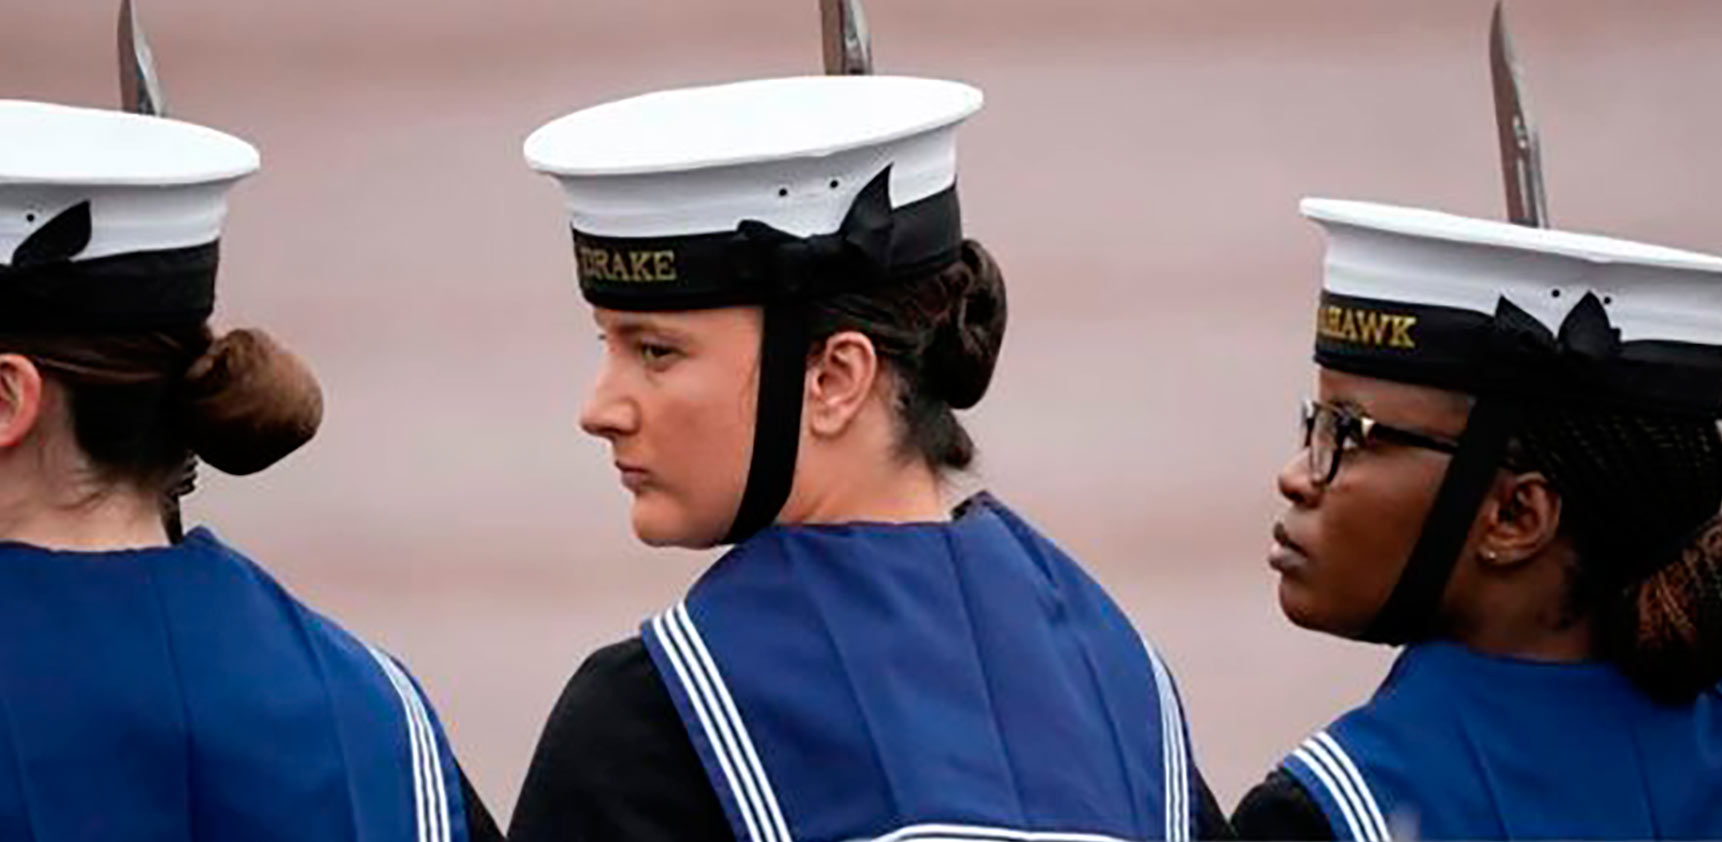 Murcia woman in Spain who recently joined British Royal Navy acted as honour guard during Coronation parades